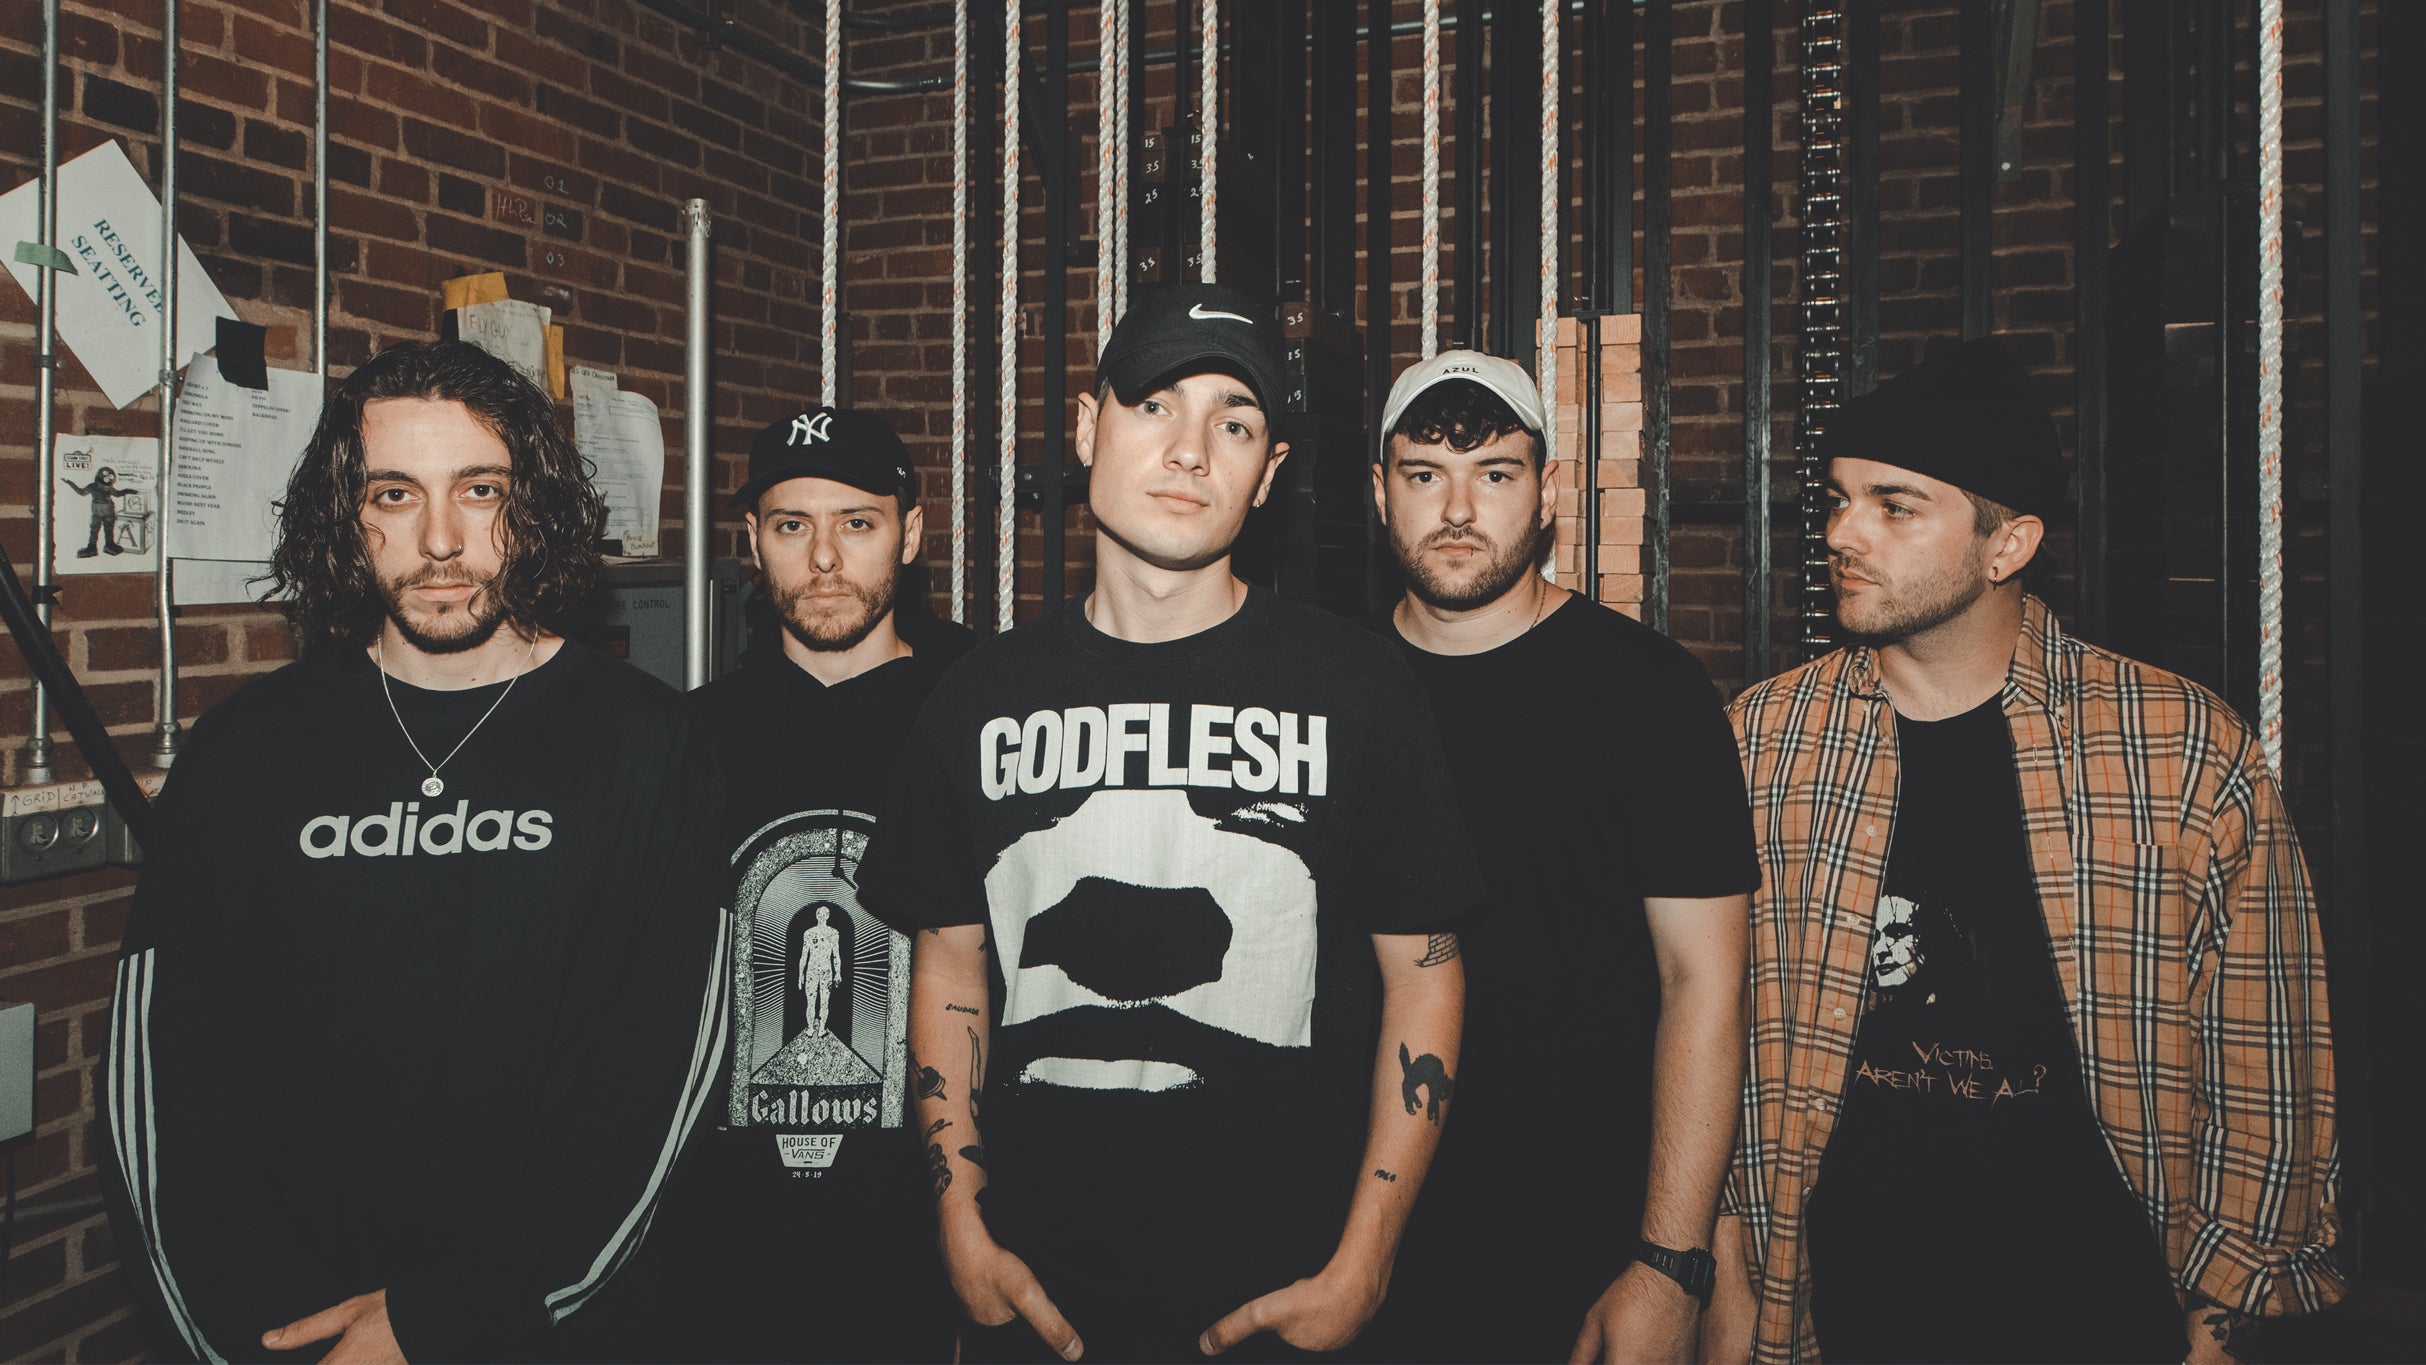 working presale password for Boston Manor advanced tickets in Manchester